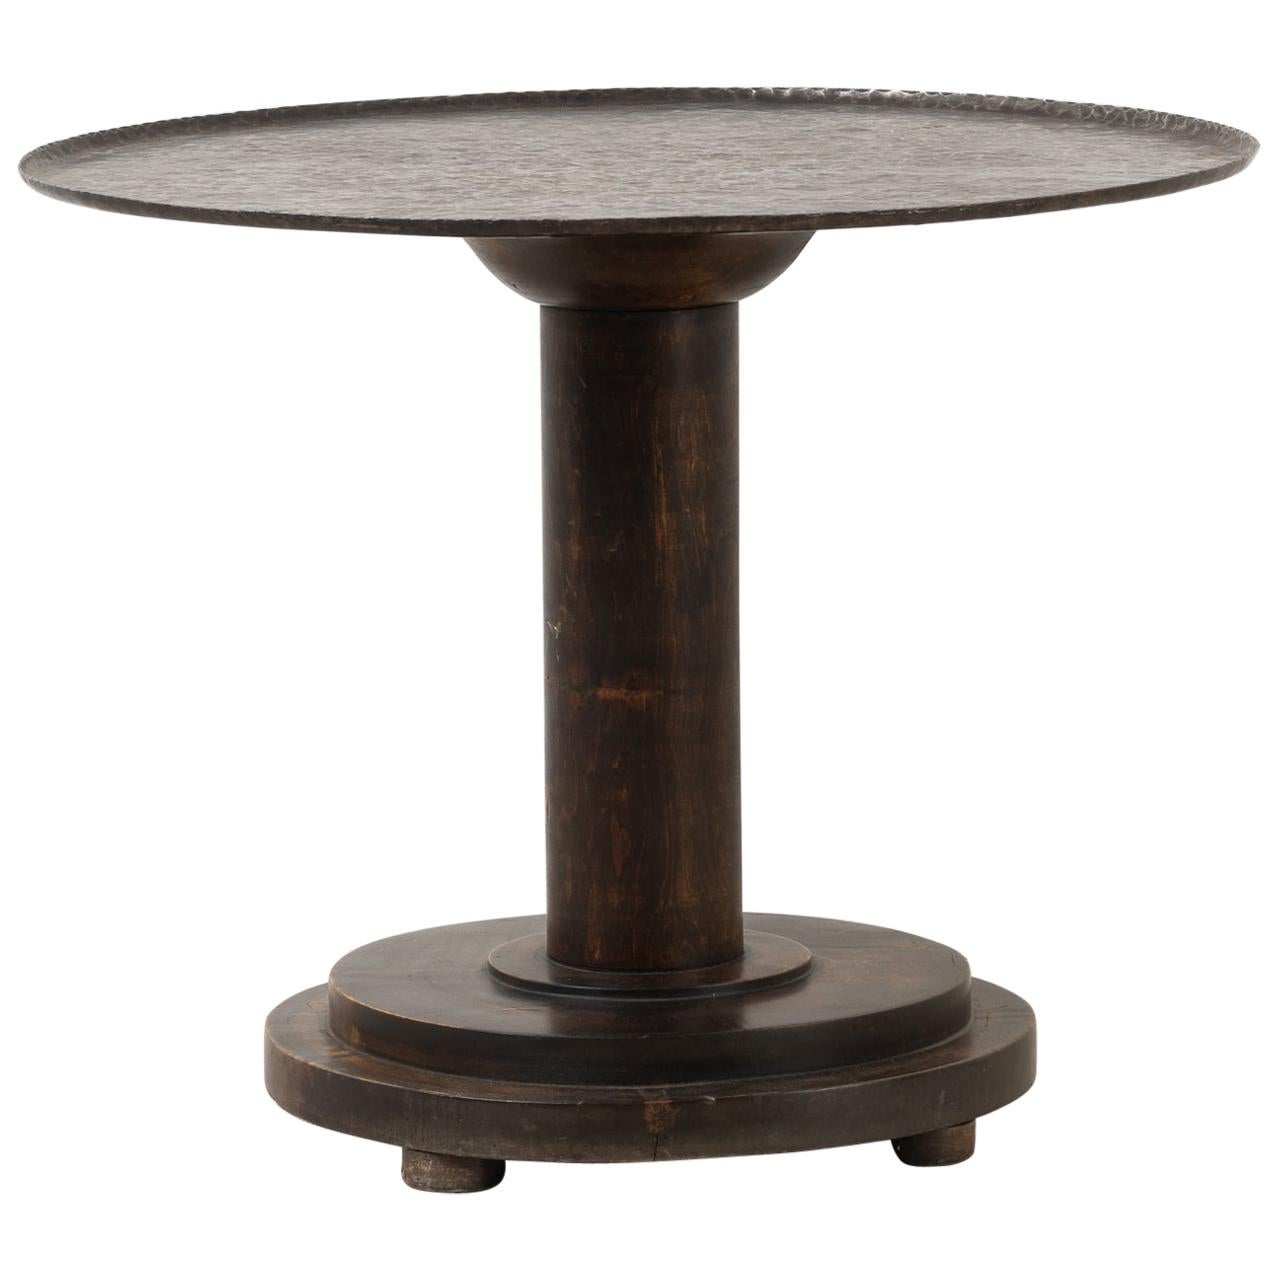 Round Art Deco Table with Iron Table Top